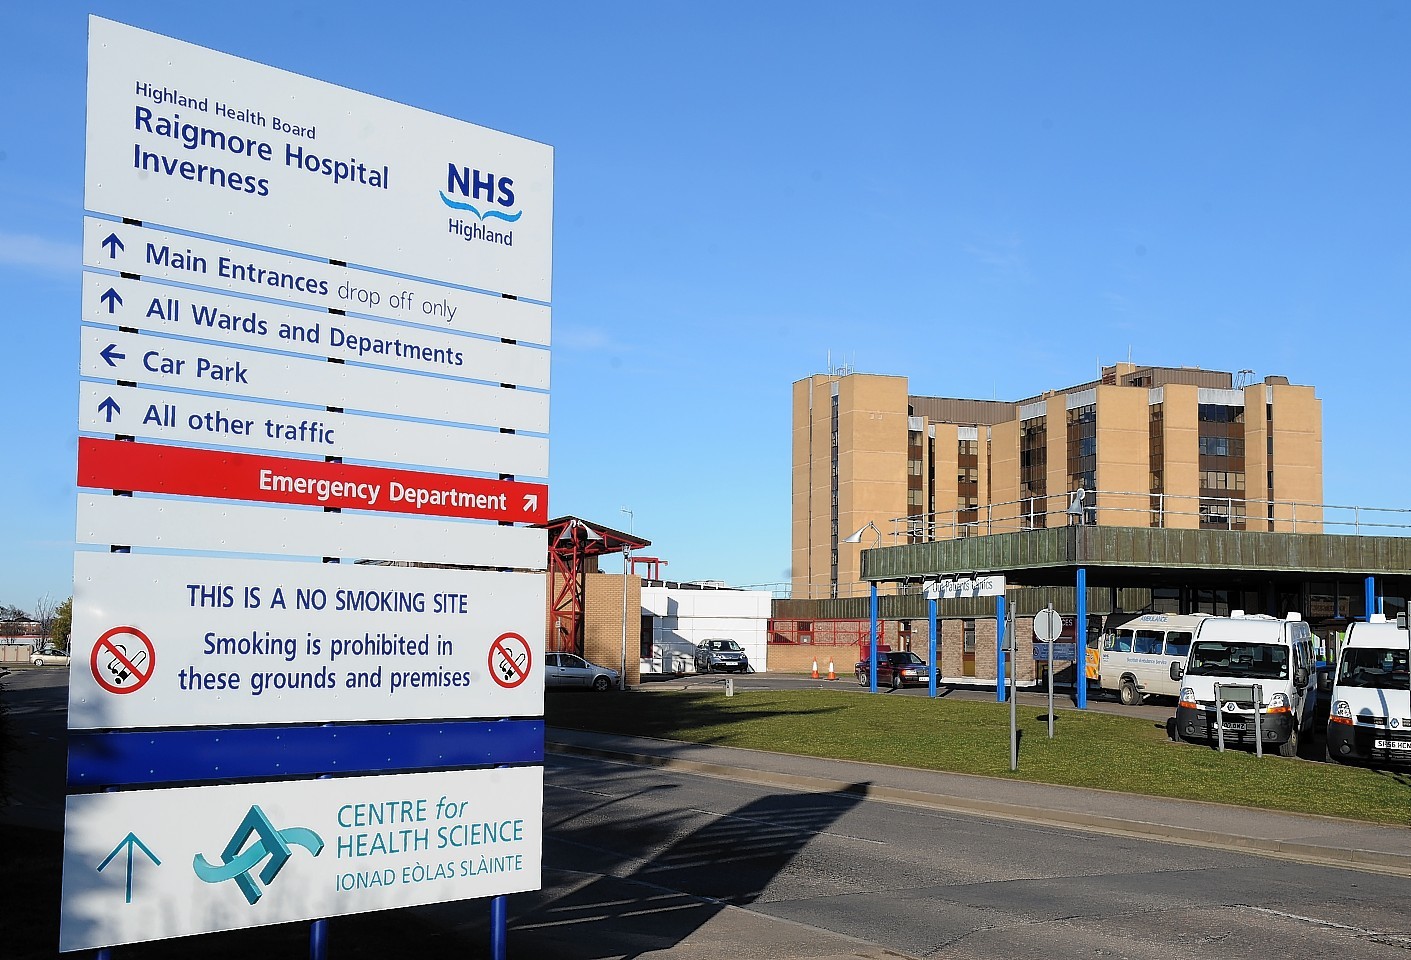 The body was discovered at Raigmore Hospital in Inverness